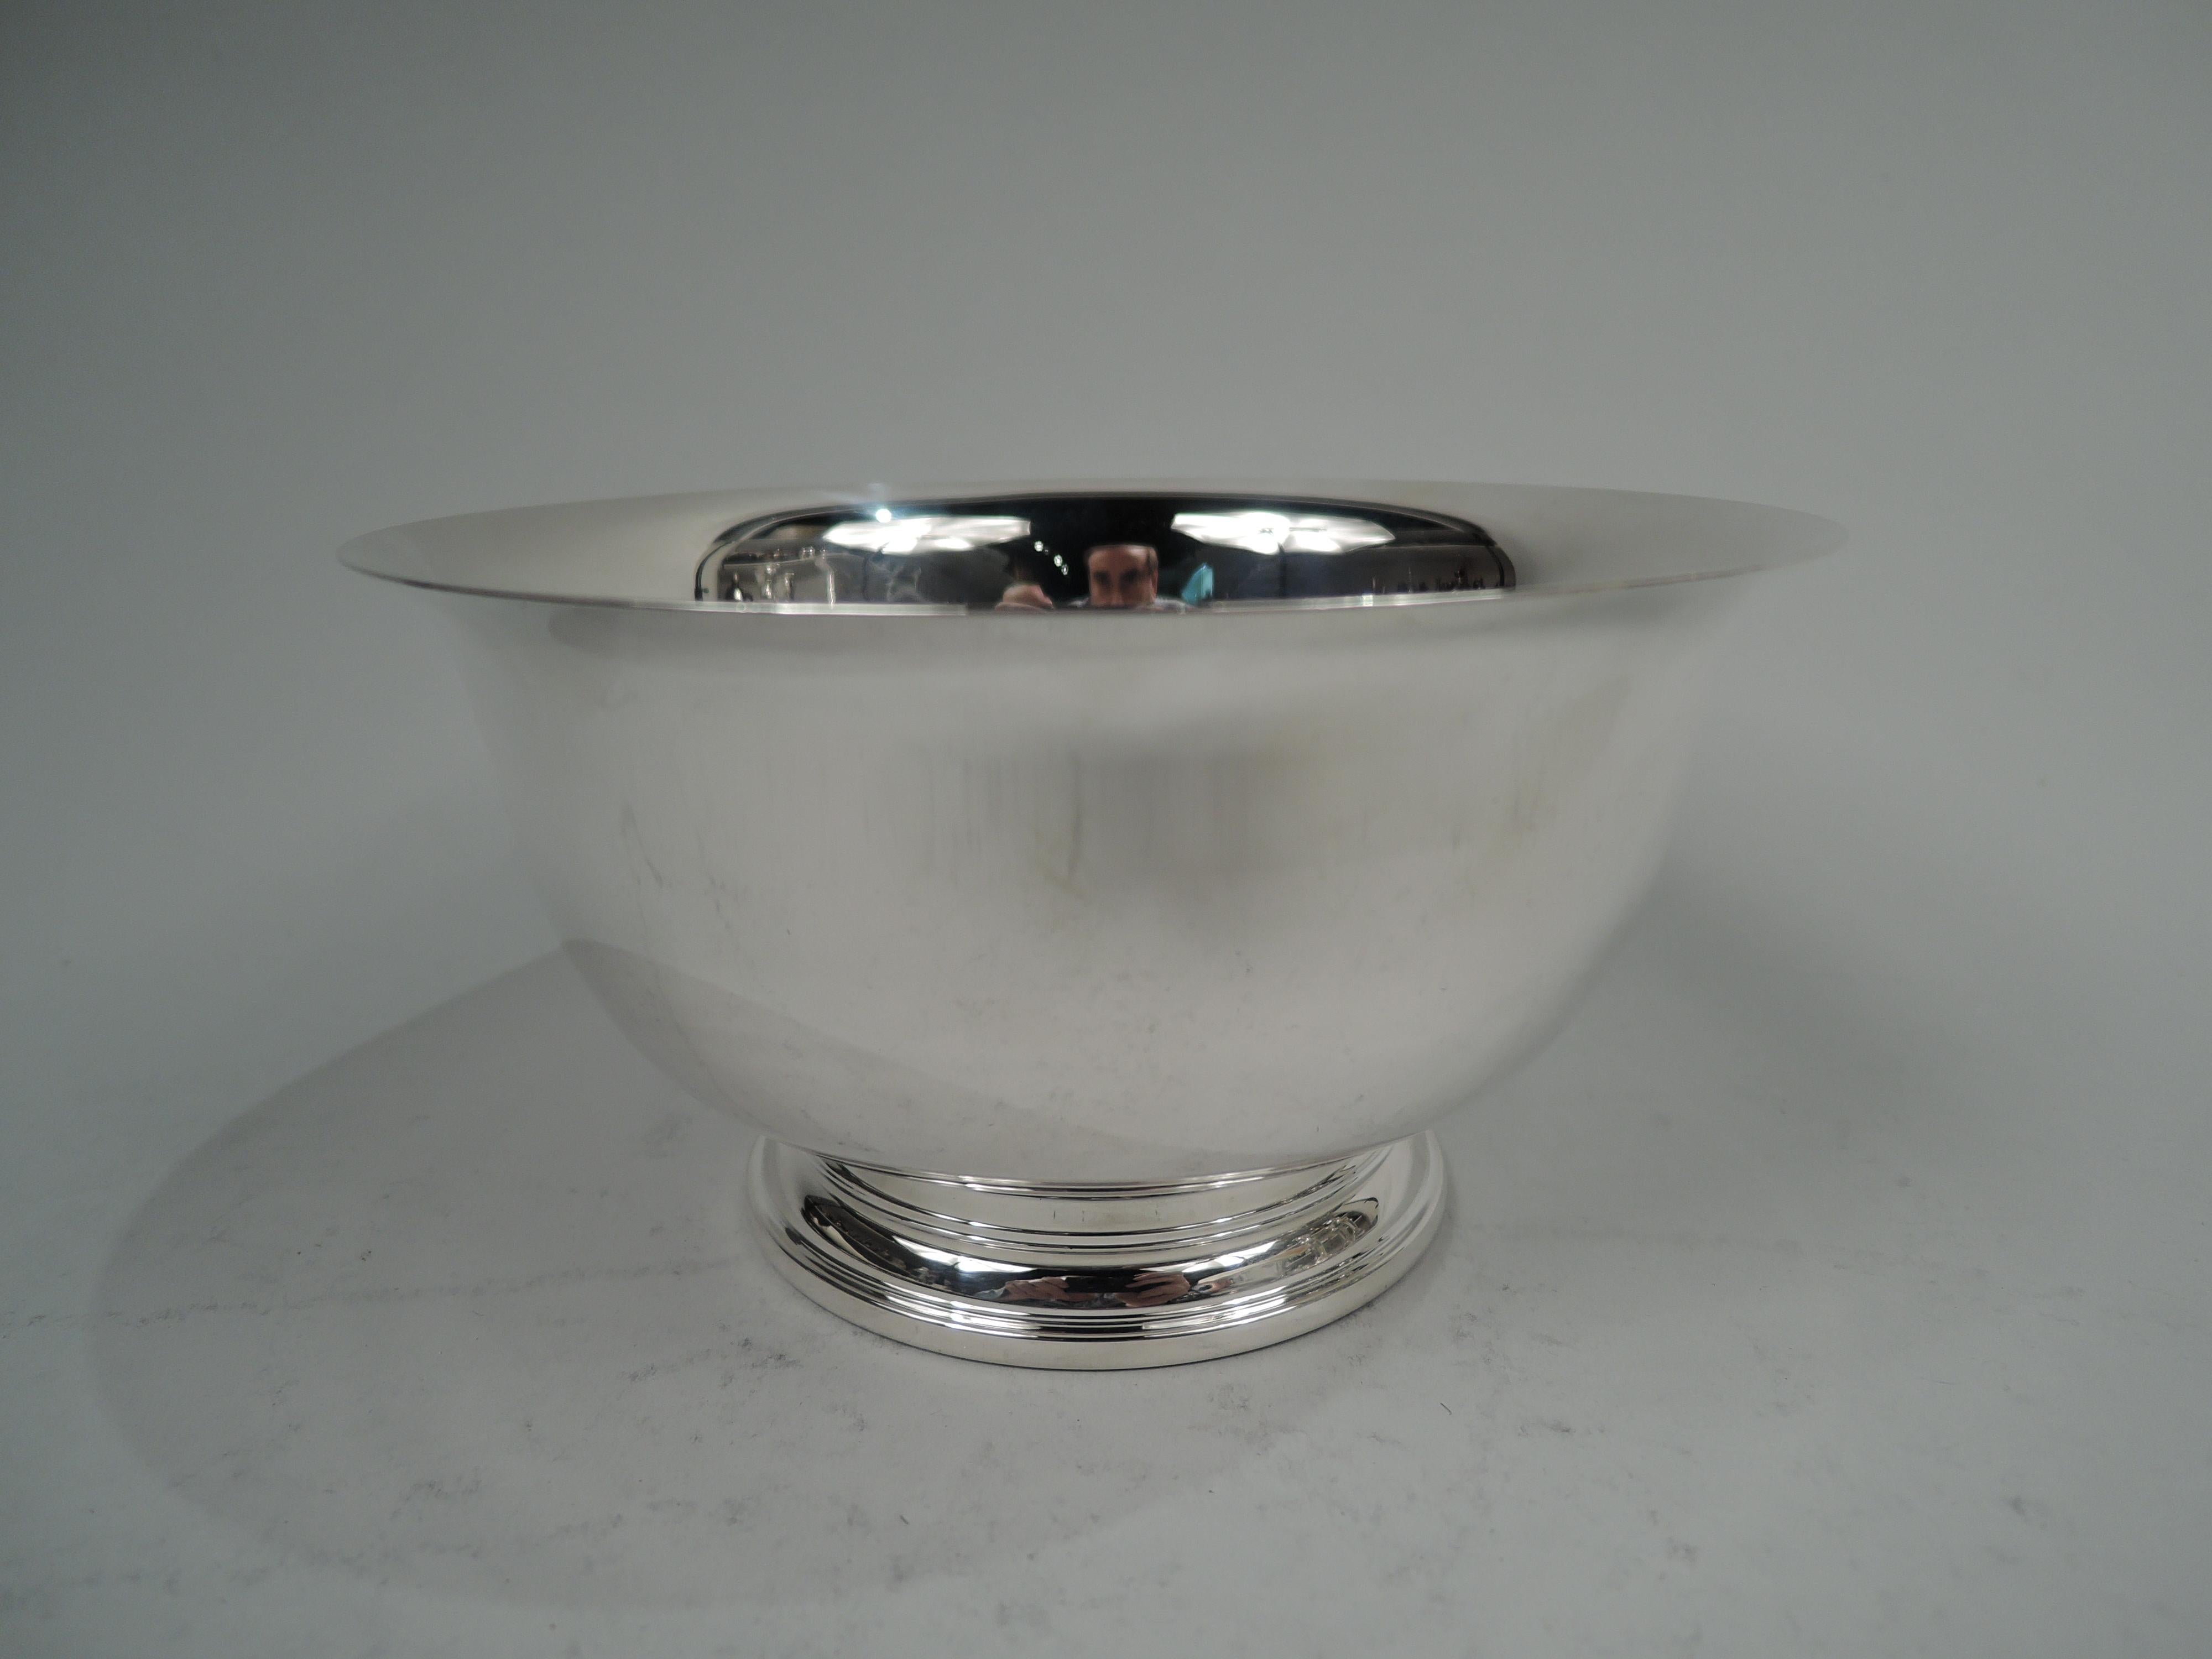 Traditional sterling silver Revere bowl. Retailed by Cartier in New York. Tapering sides with flared rim and curved bottom; stepped foot. Fully marked including retailer’s stamp, no. 9166, and phrase “A Paul Revere / Reproduction”. Weight: 7.3 troy